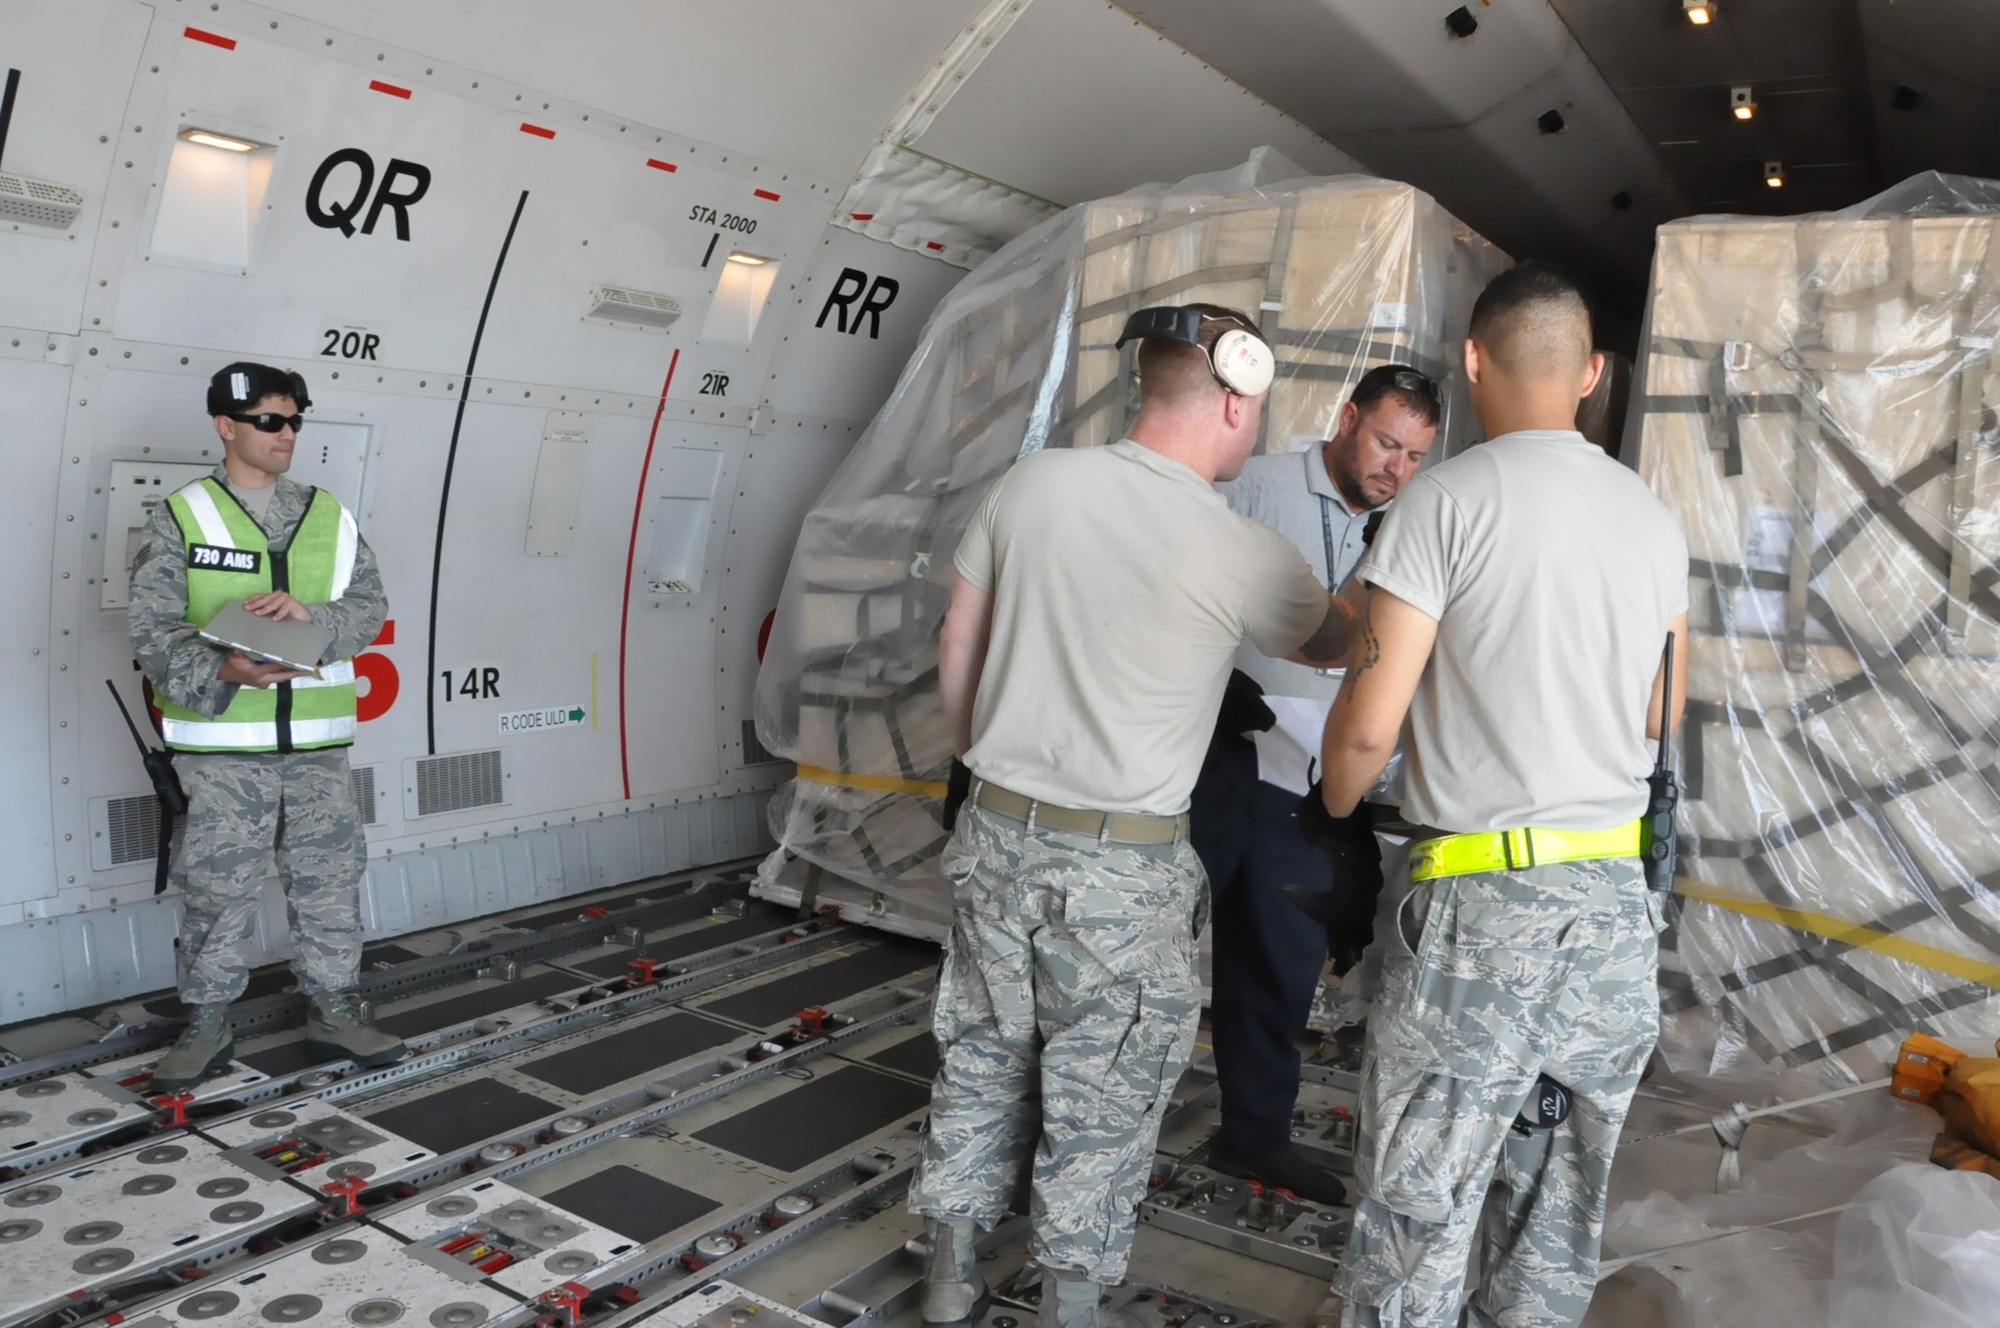 Airmen from the 730th Air Mobility Squadron offload cargo at Yokota Air Base, Japan before the aircraft continues onto Paya Lebar Air Base in Singapore, 22 Aug. 2018. Air Mobility Command sustains 42 en-route locations around the globe through the use of a complex system of channel routes. These routes enable transport of personnel and worldwide cargo from location to location to sustain the joint warfighter.